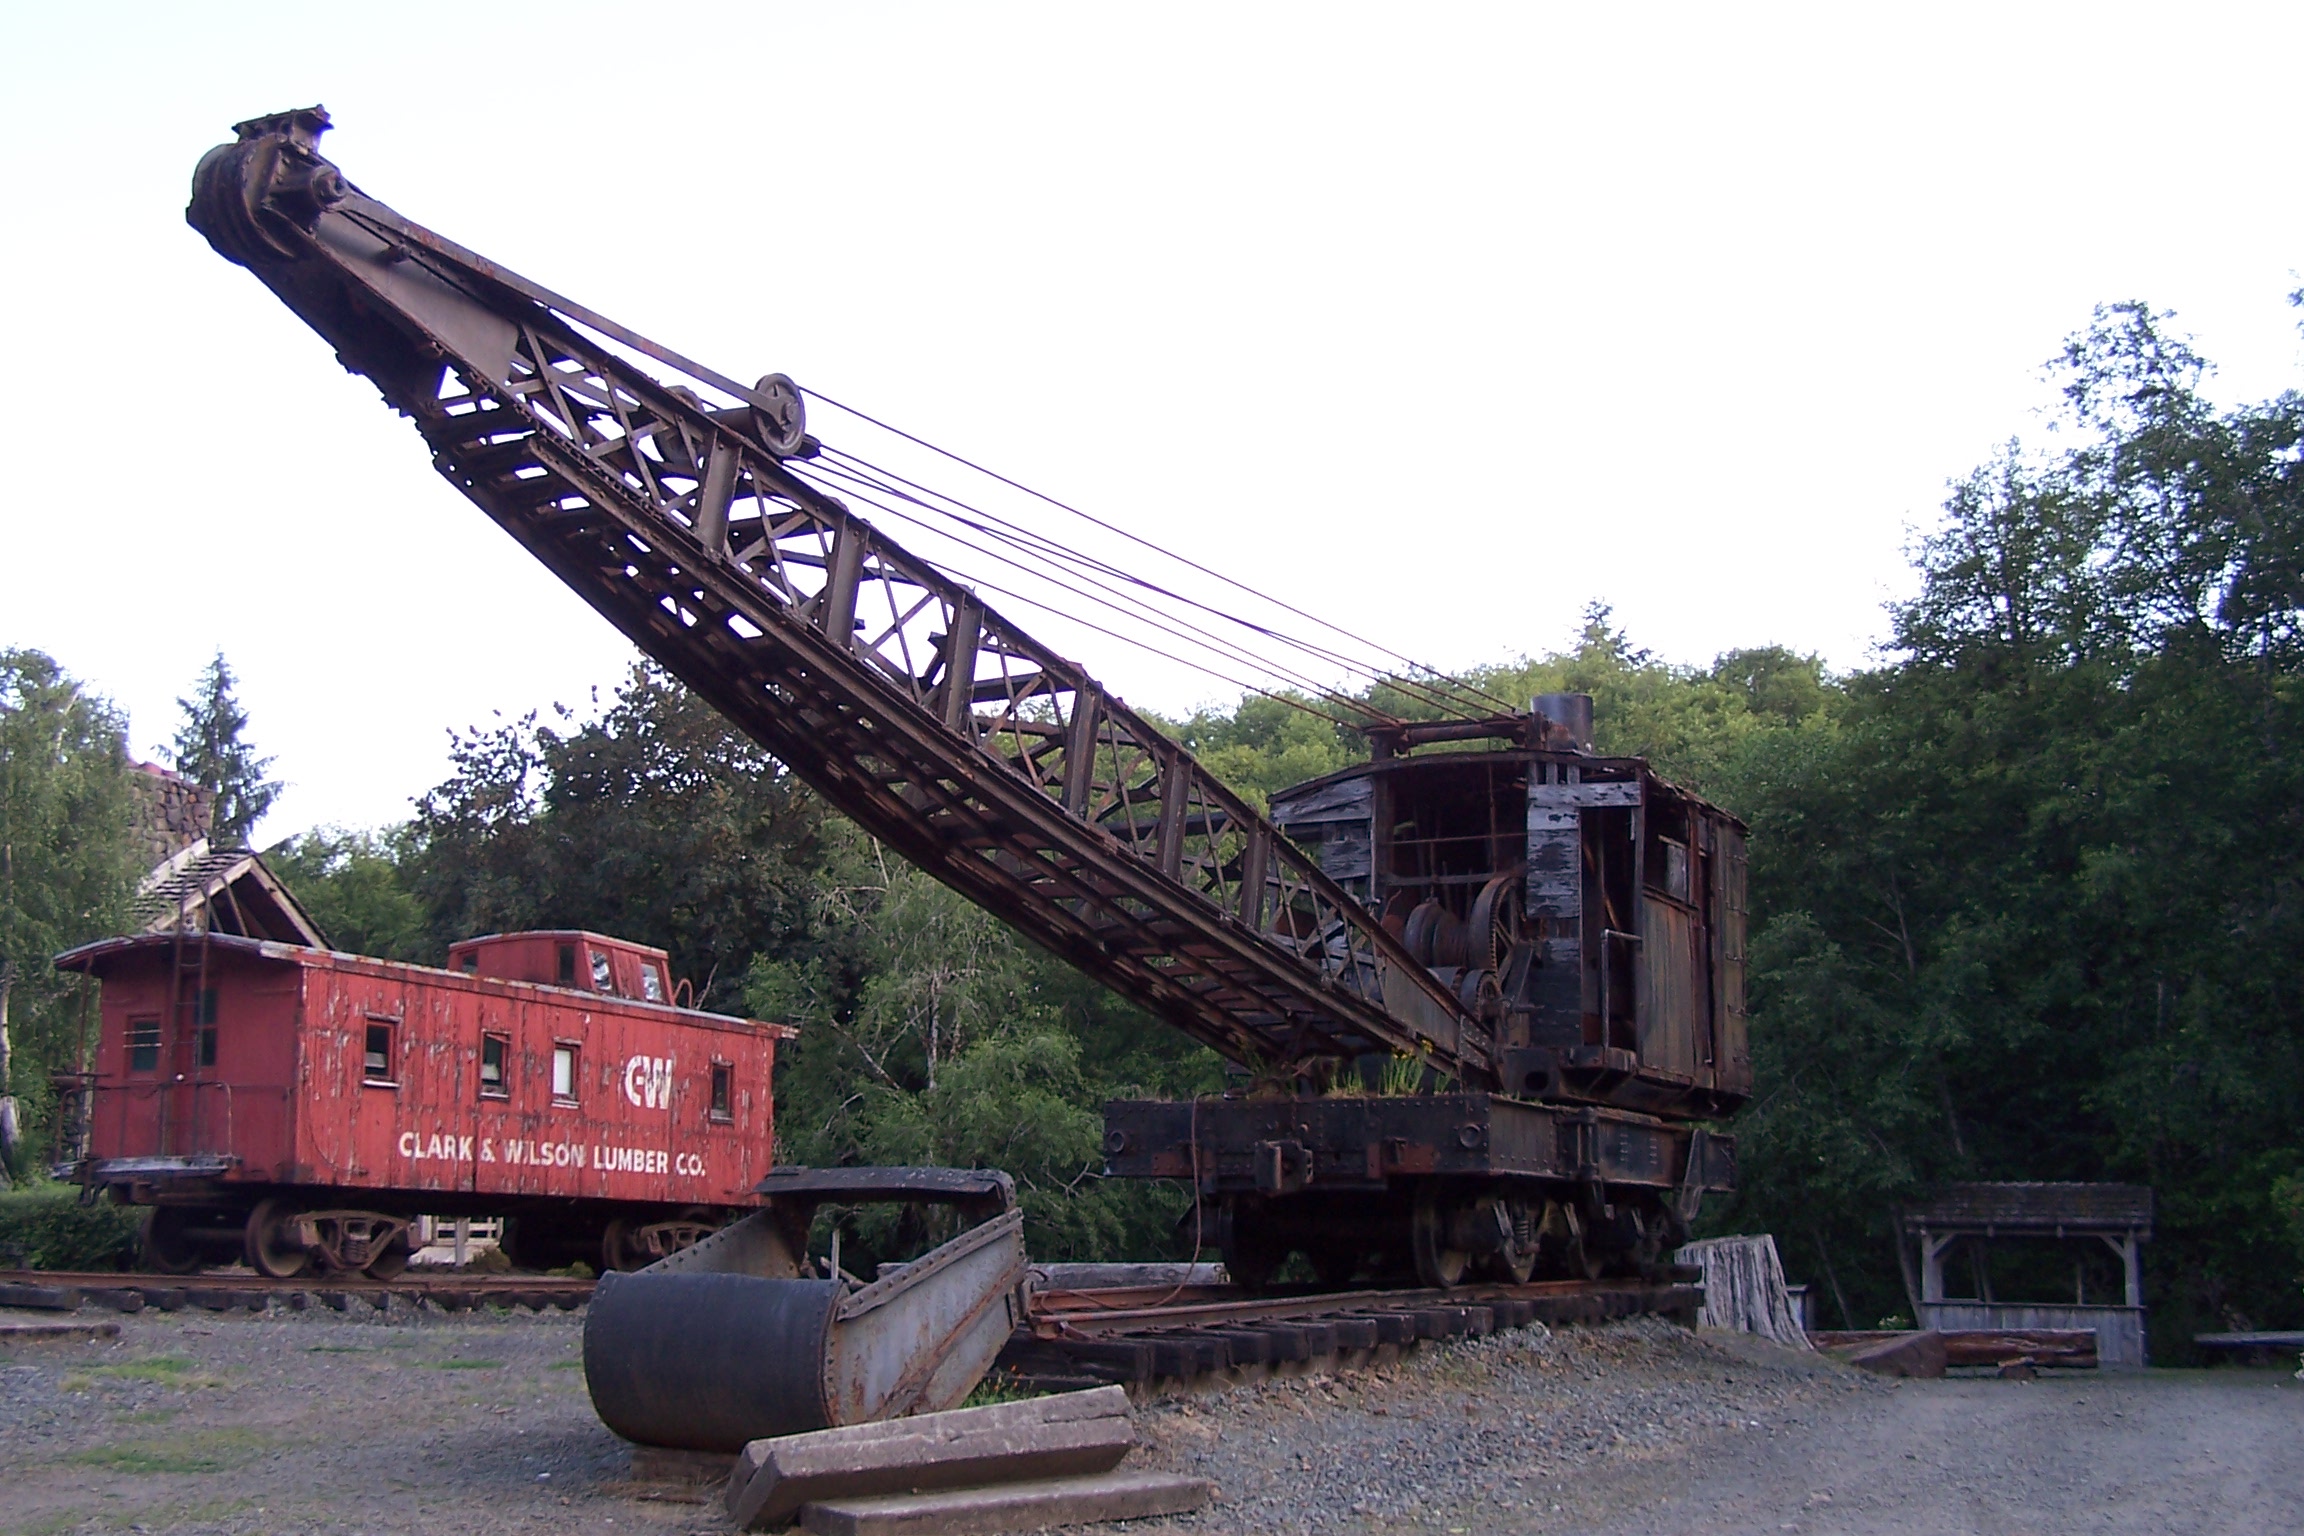 there is an old railroad crane that is on display